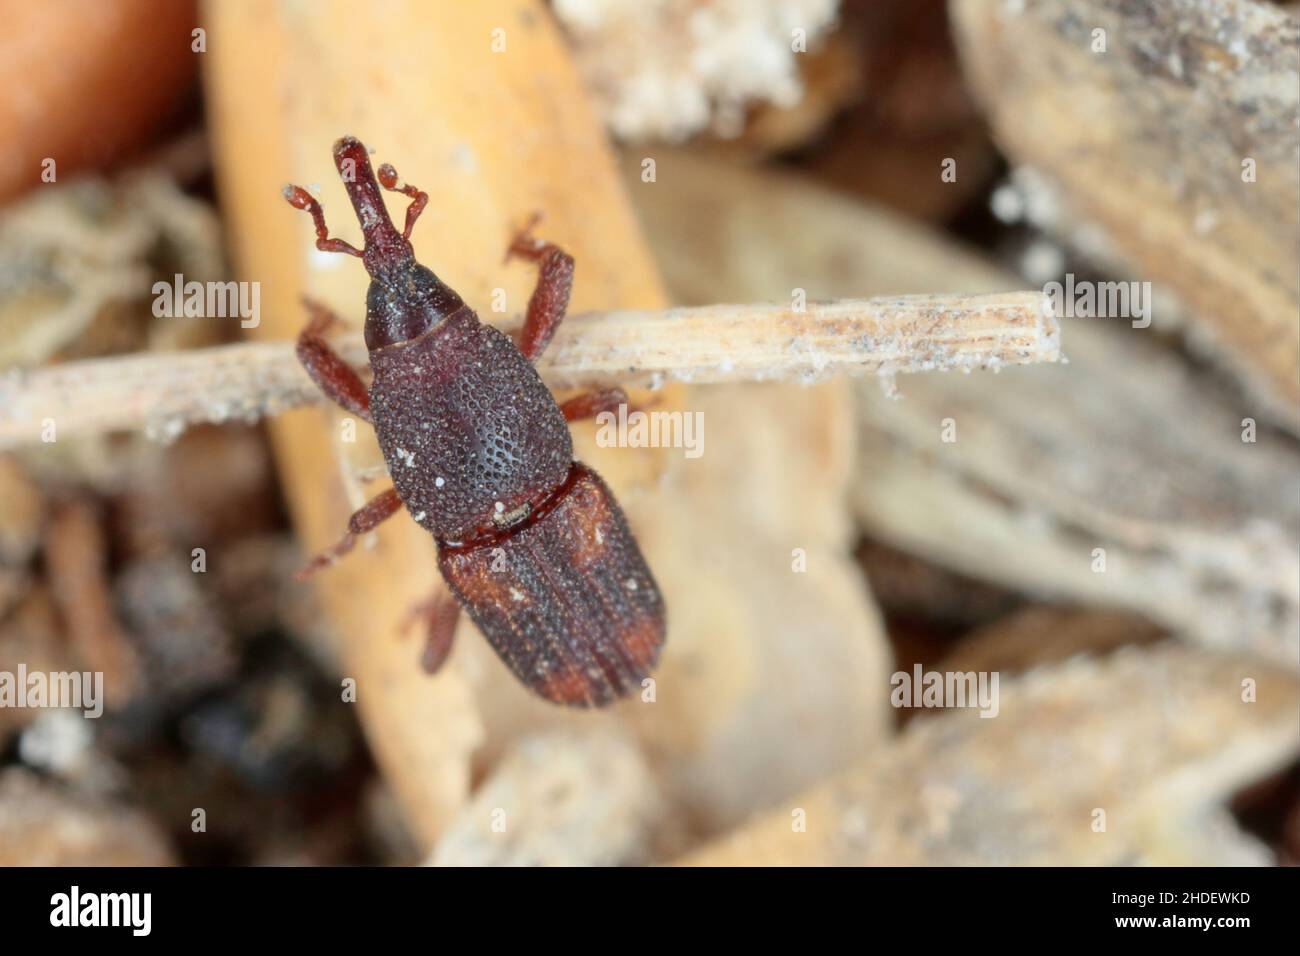 The rice weevil Sitophilus oryzae a stored product pest on damaged grain Stock Photo